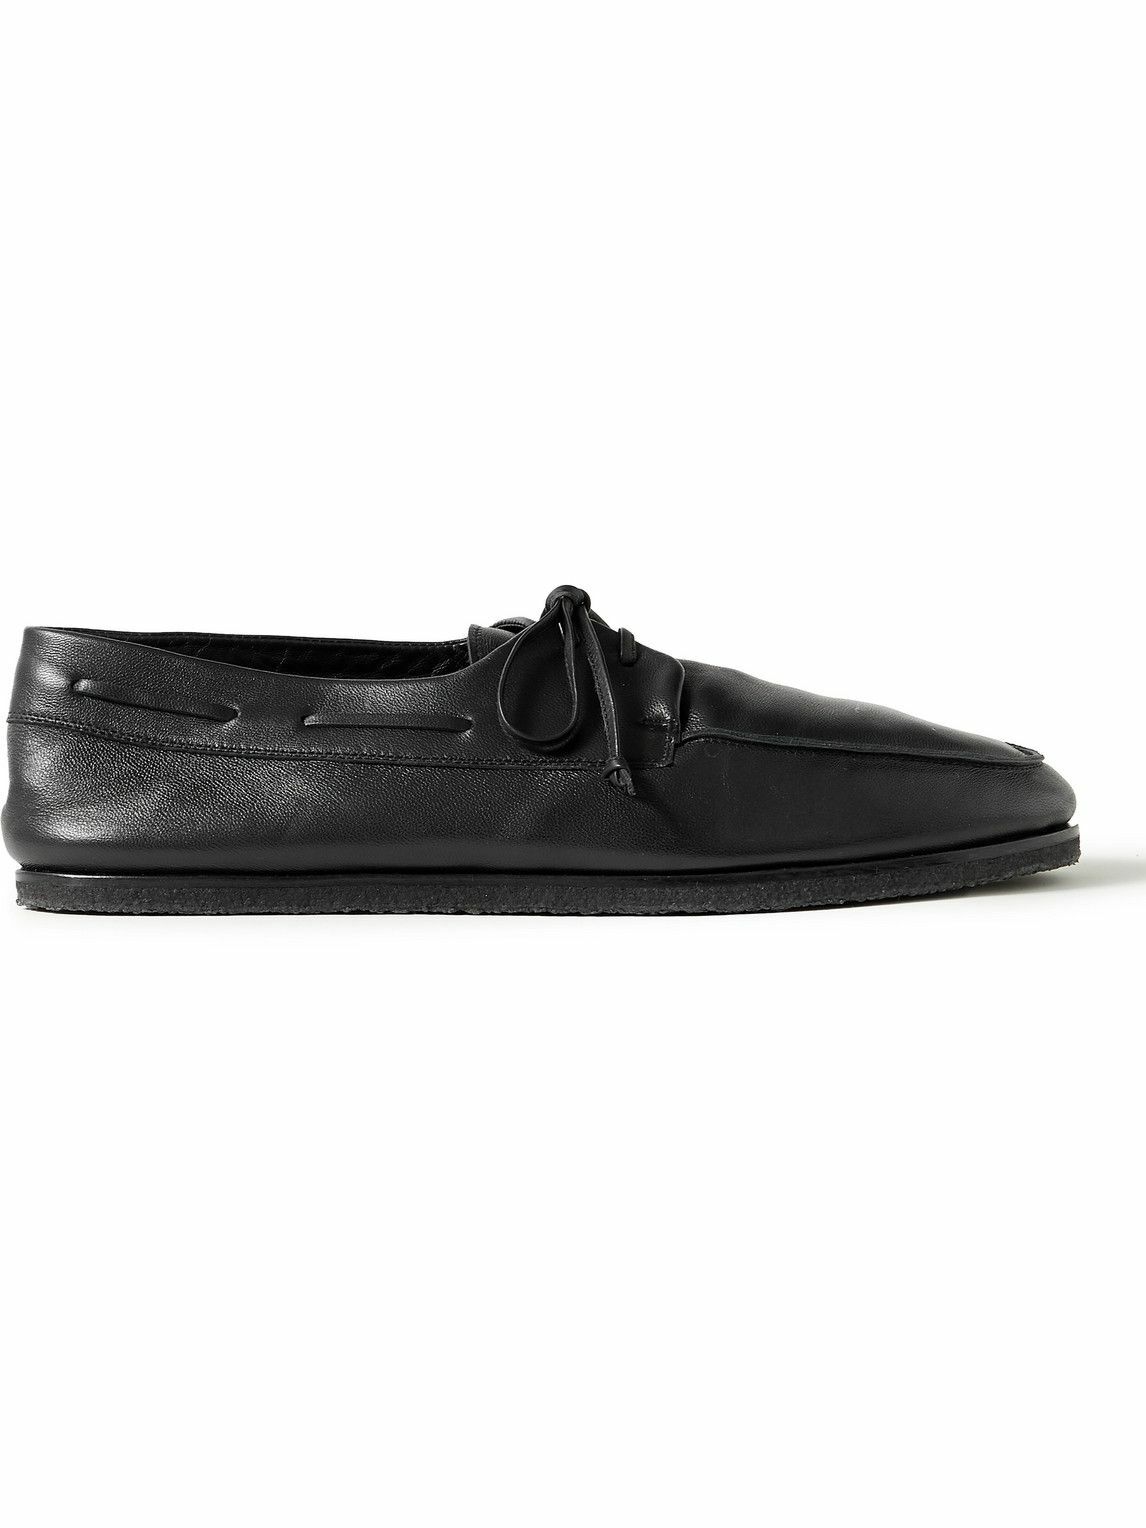 The Row - Sailor Leather Loafers - Black The Row